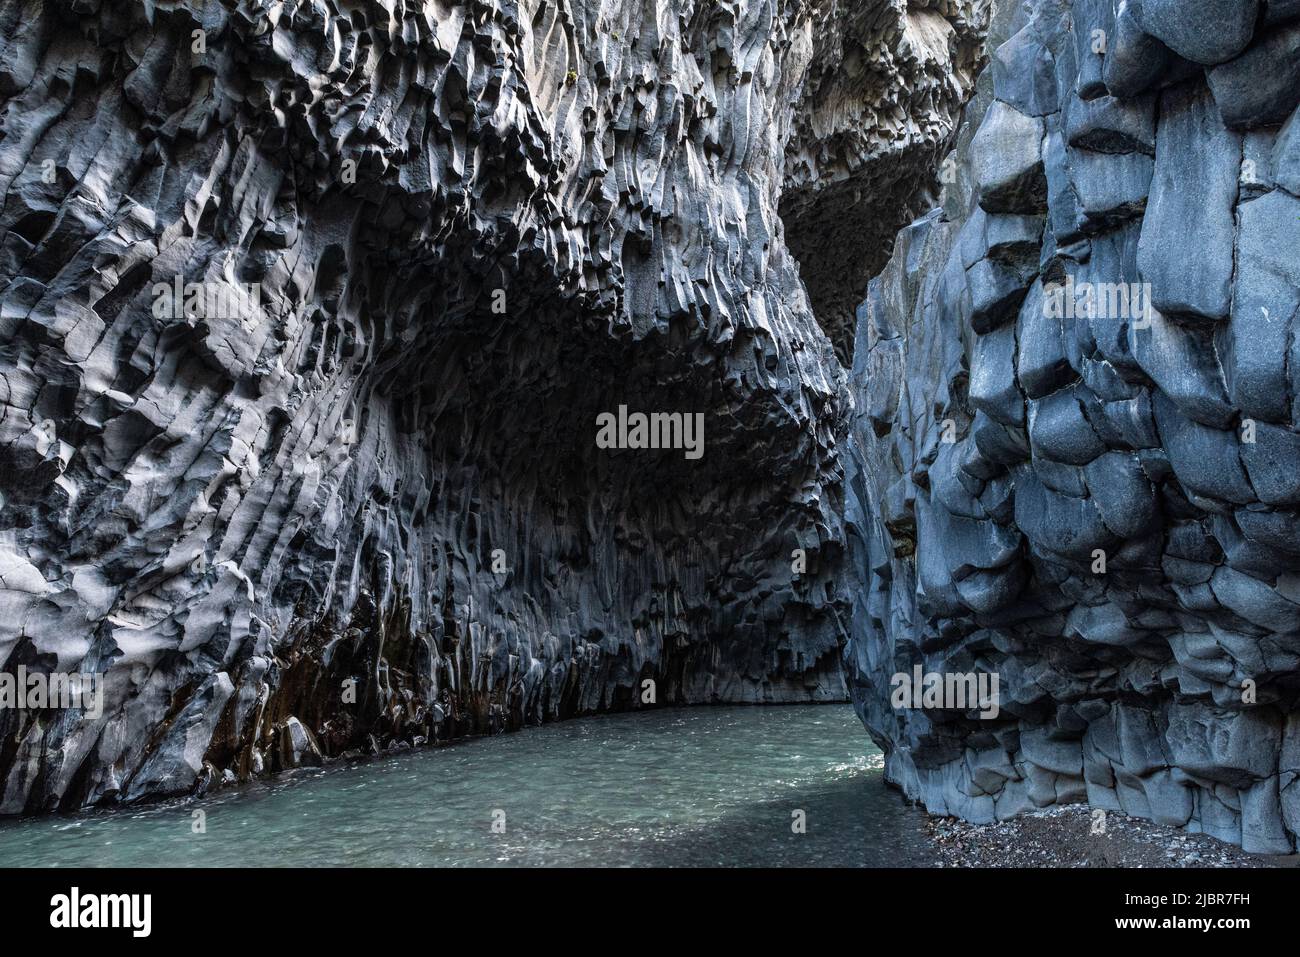 Dramatic volcanic basalt rock formations in the Gola dell'Alcantara, a deep river gorge near Mount Etna in eastern Sicily, Italy. Stock Photo